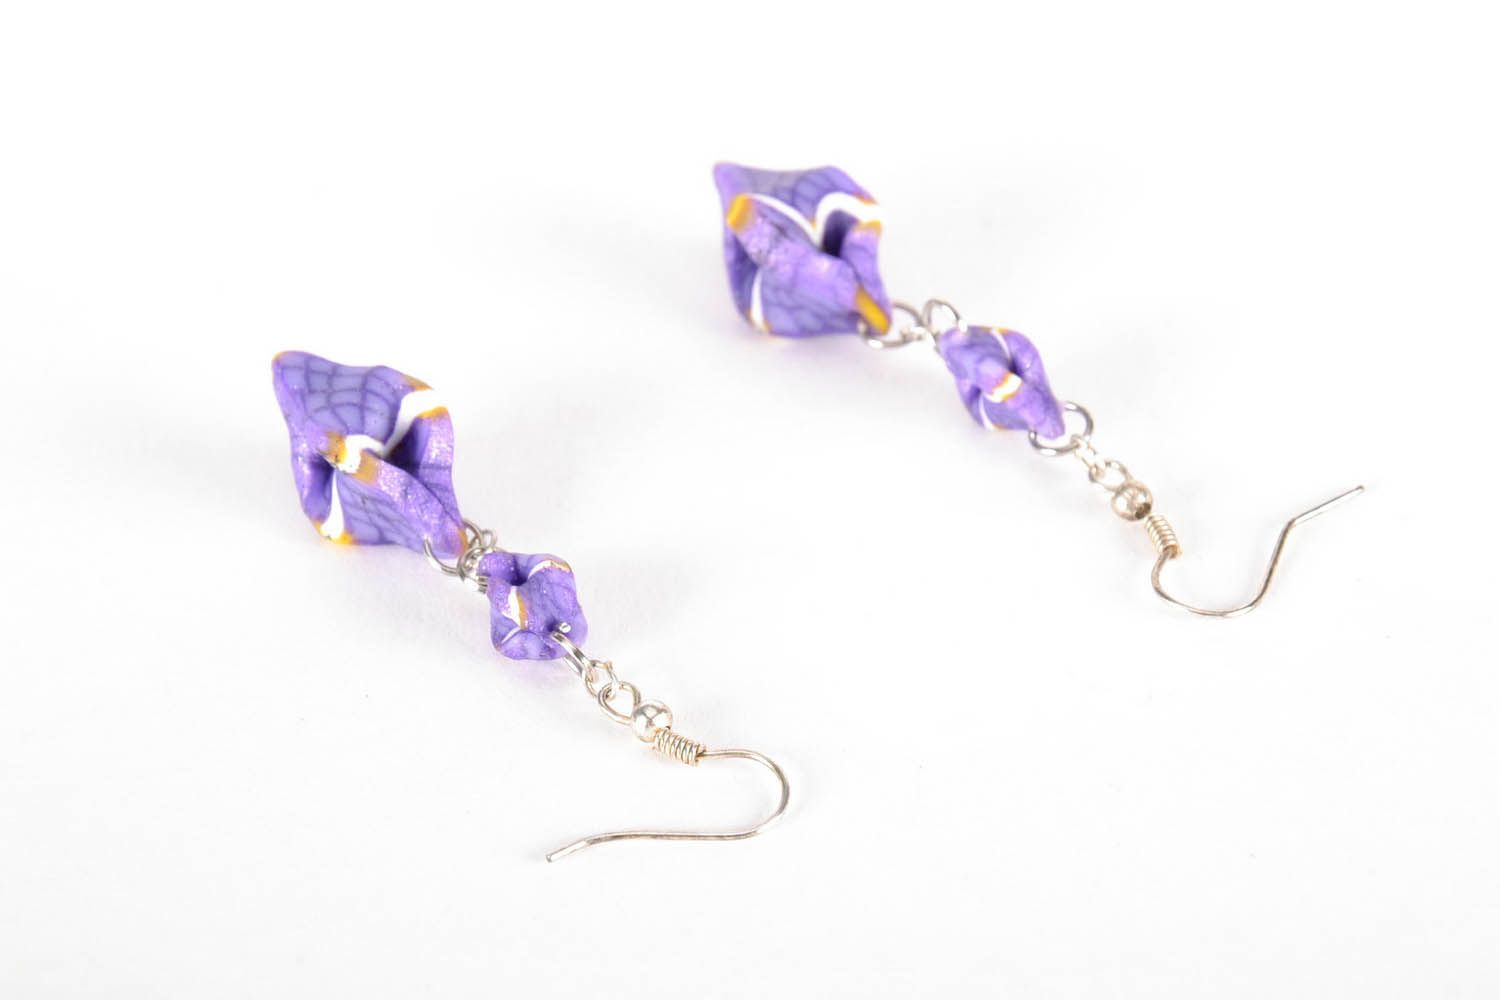 Violet earrings made of polymer clay photo 2